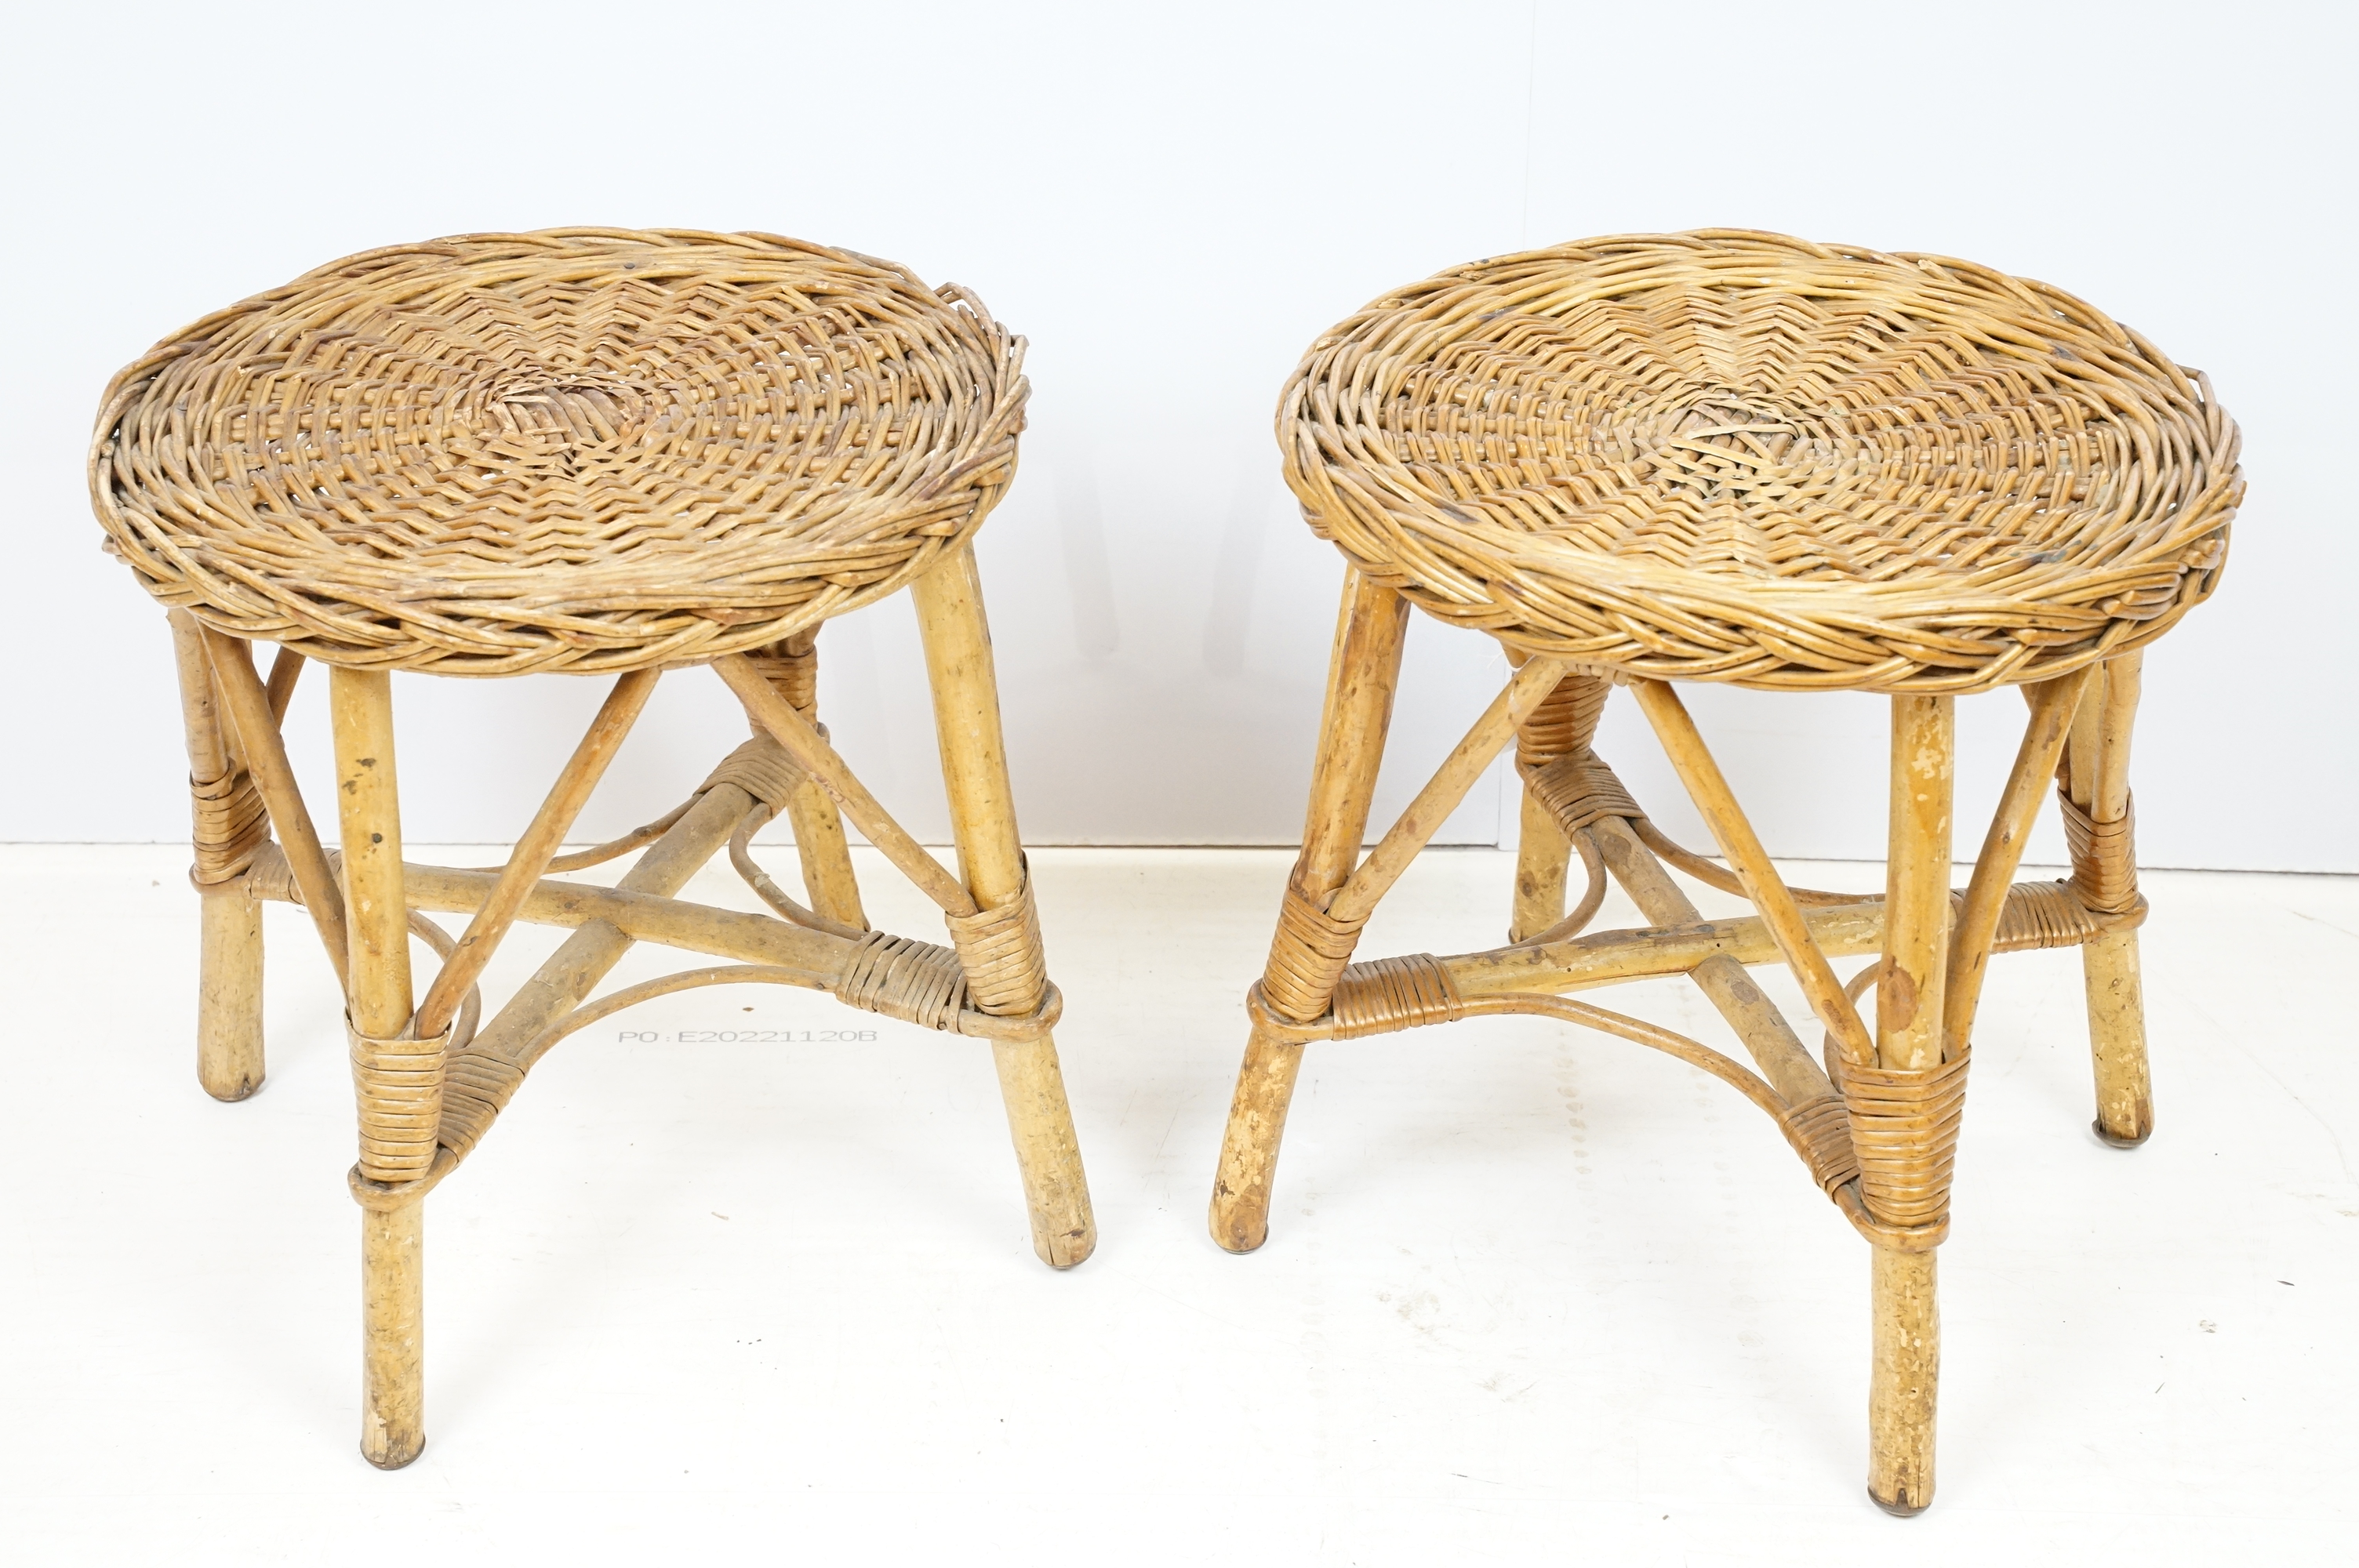 Pair of Wicker & Bamboo Stool or Stands, 36cm diameter x 36cm high